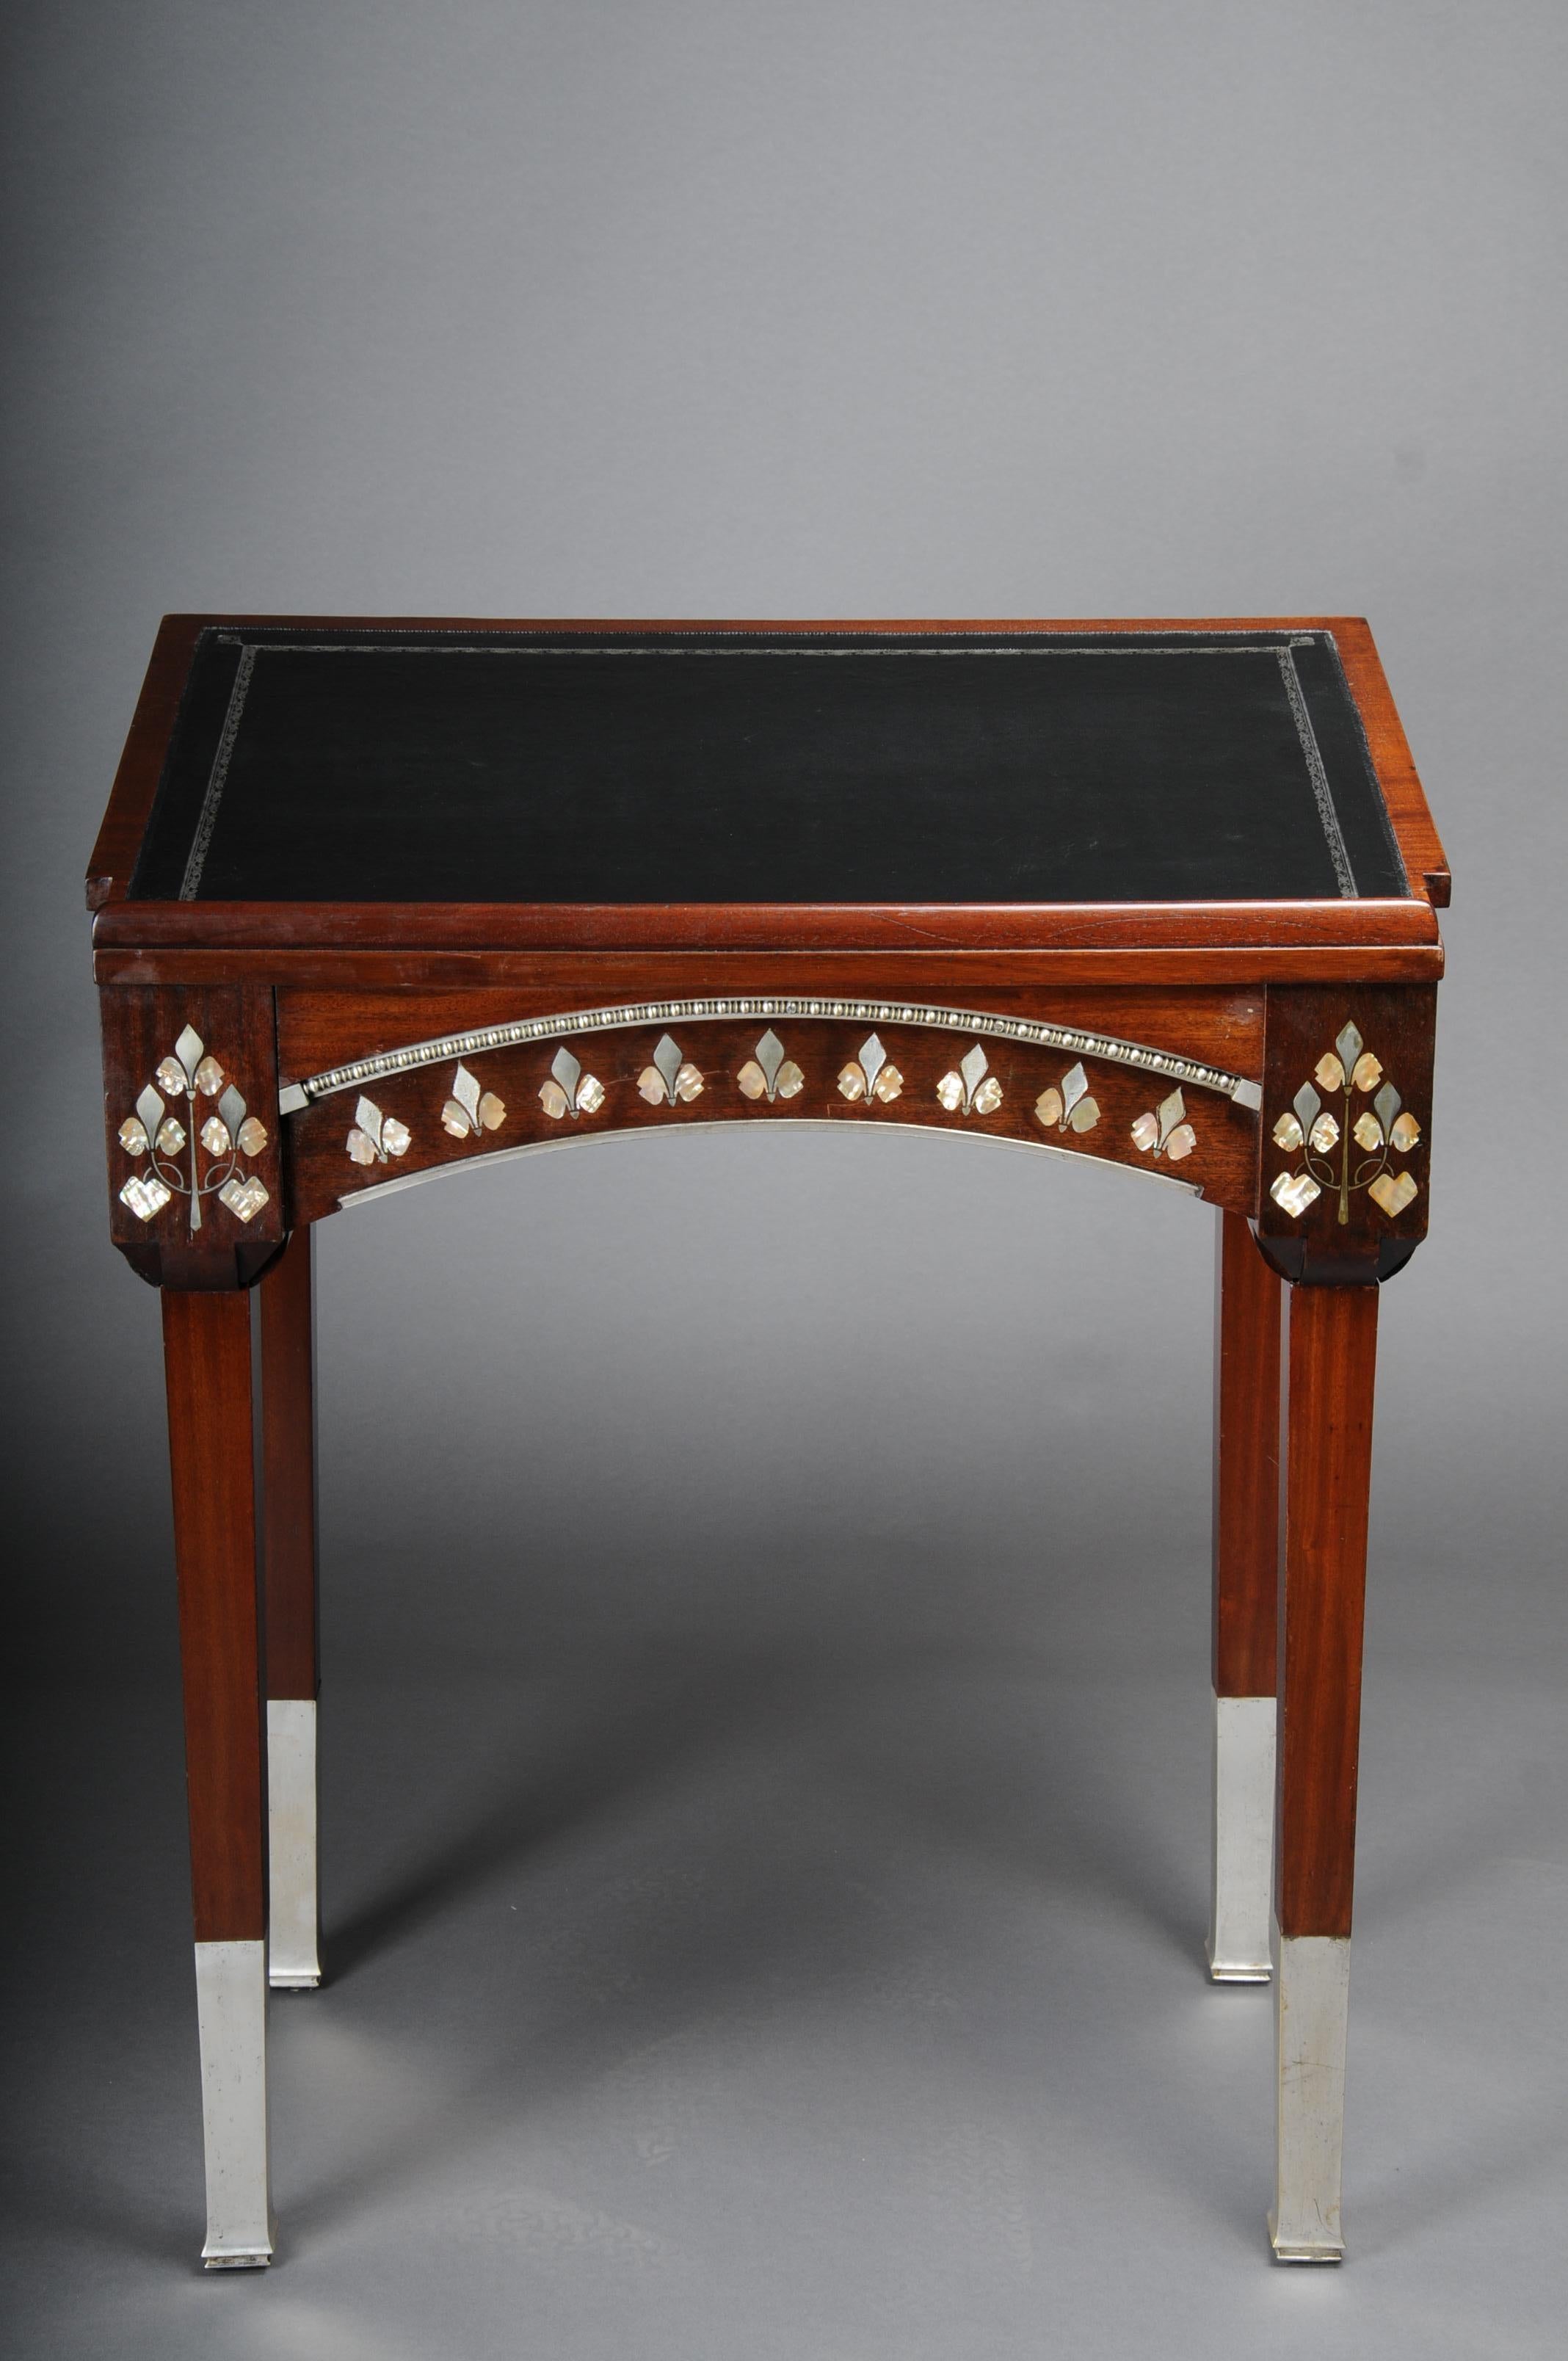 First class Art Nouveau standing desk /Reception table around 1890, mother-of-pearl and silver, after Carlo Bugatti


Unique standing desk made of solid wood, mahogany in Art Nouveau style around 1890. Very high-quality and elaborately finished